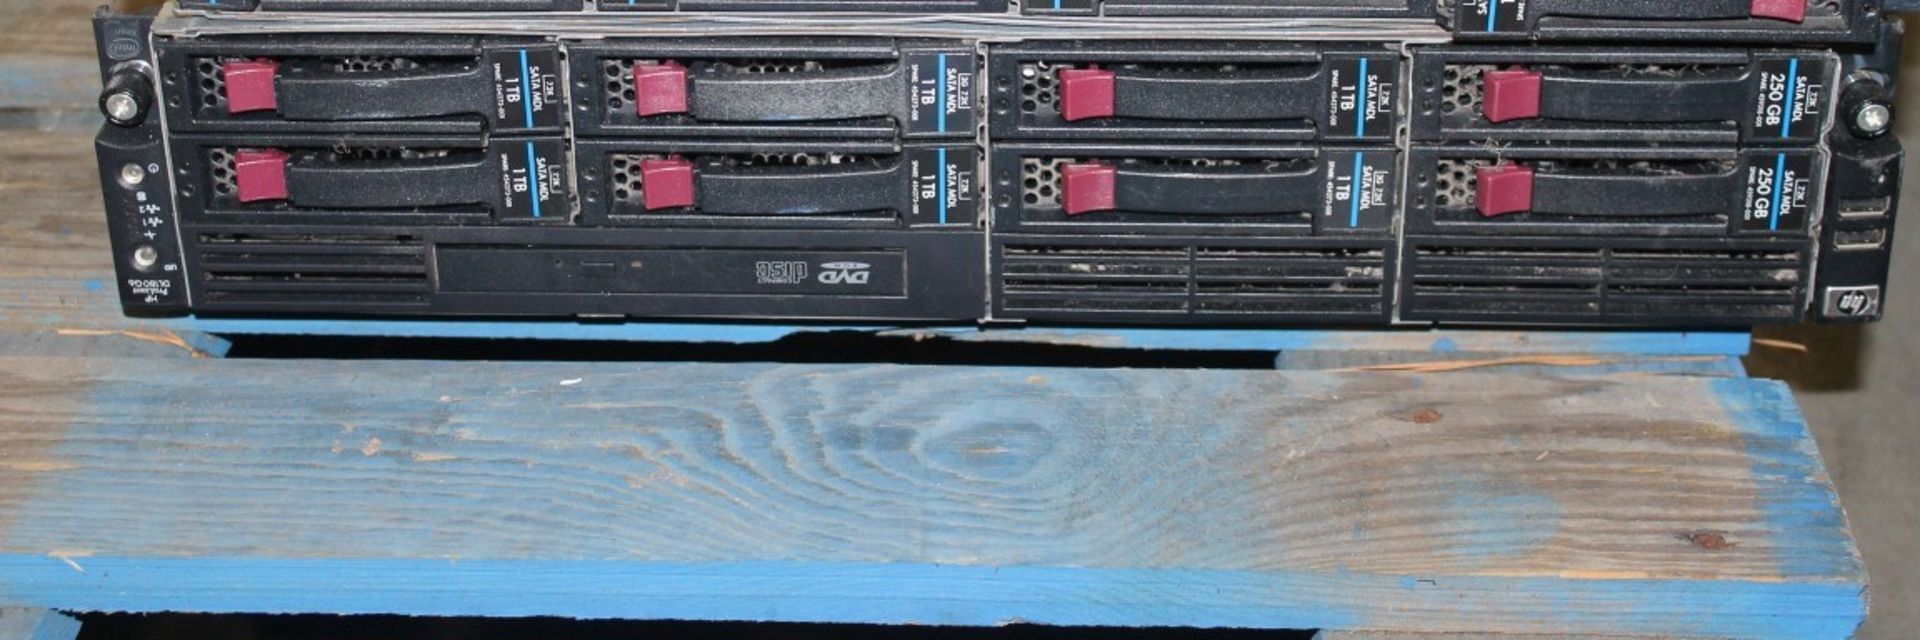 HP PROLIANT DL180 G6 SERVER WITH 8 PCS OF 1TB HARD DRIVE